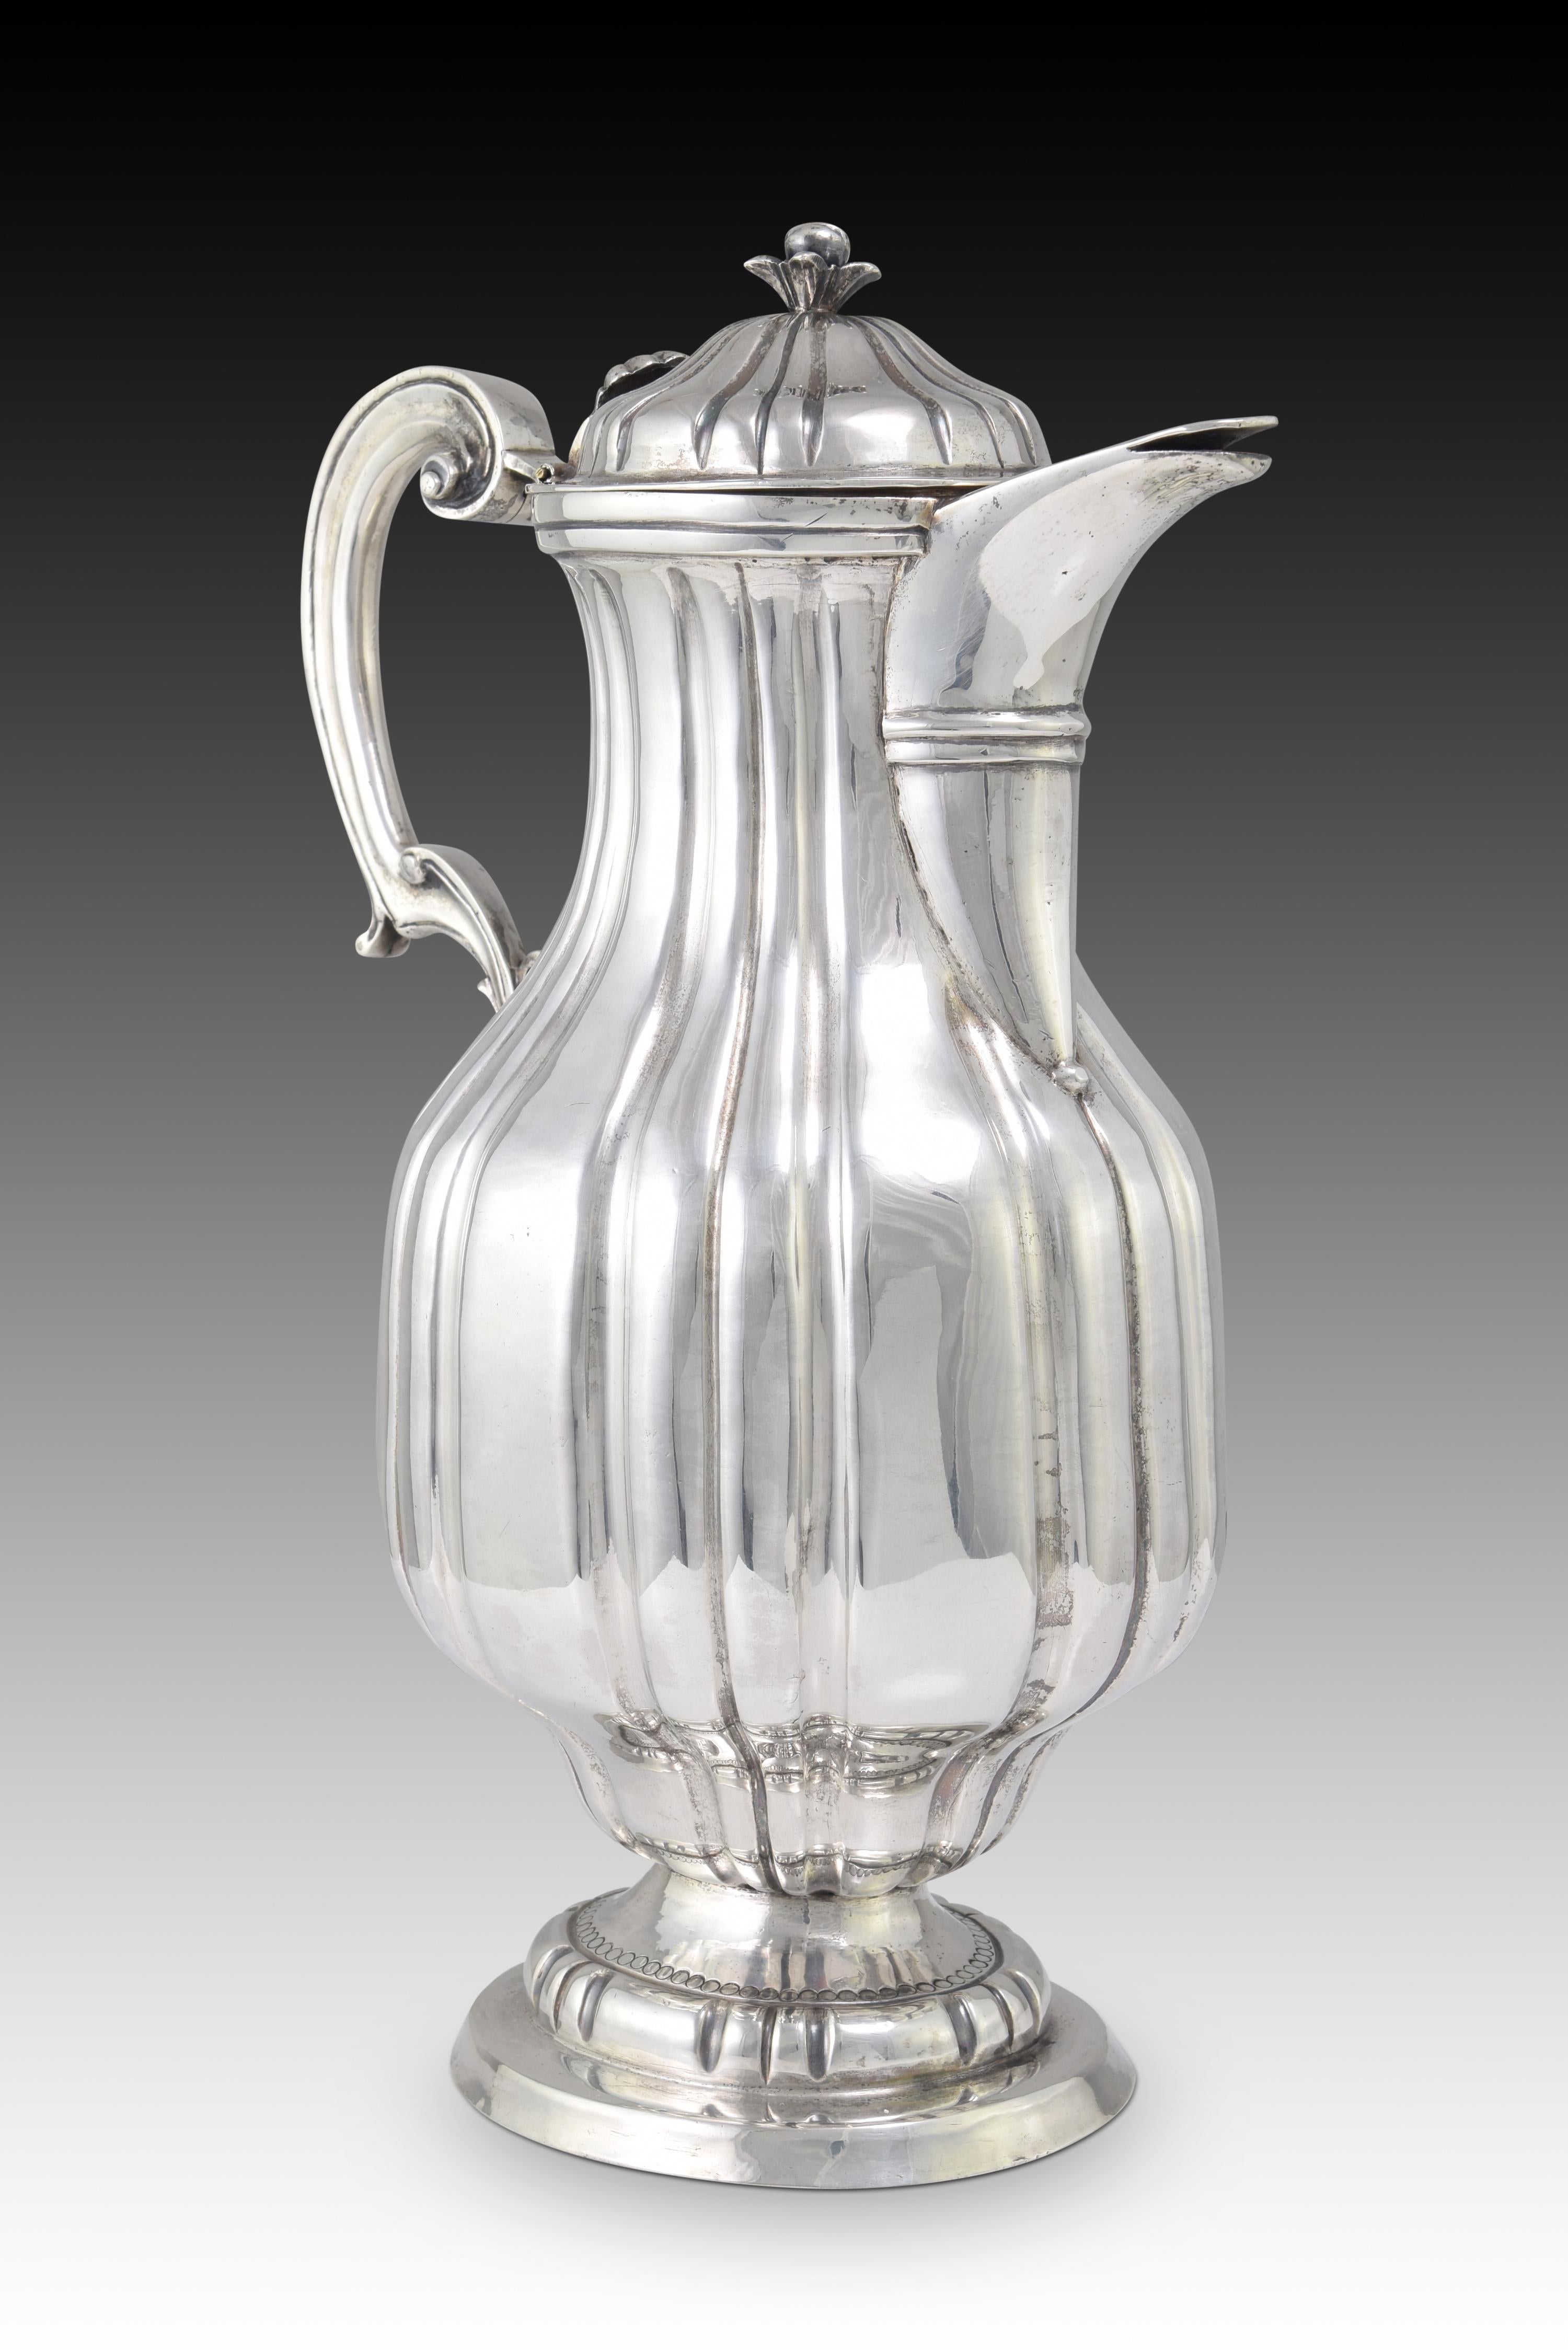 Jug or jug. Silver in its color. MARTINEZ MORENO, Mateo. Cordoba, Spain, possibly 1797. 
With contrast and chisel marks. 
Made in silver in its color, the jug has an oval base, which rises flat until it reaches a molding with vertical lines grouped